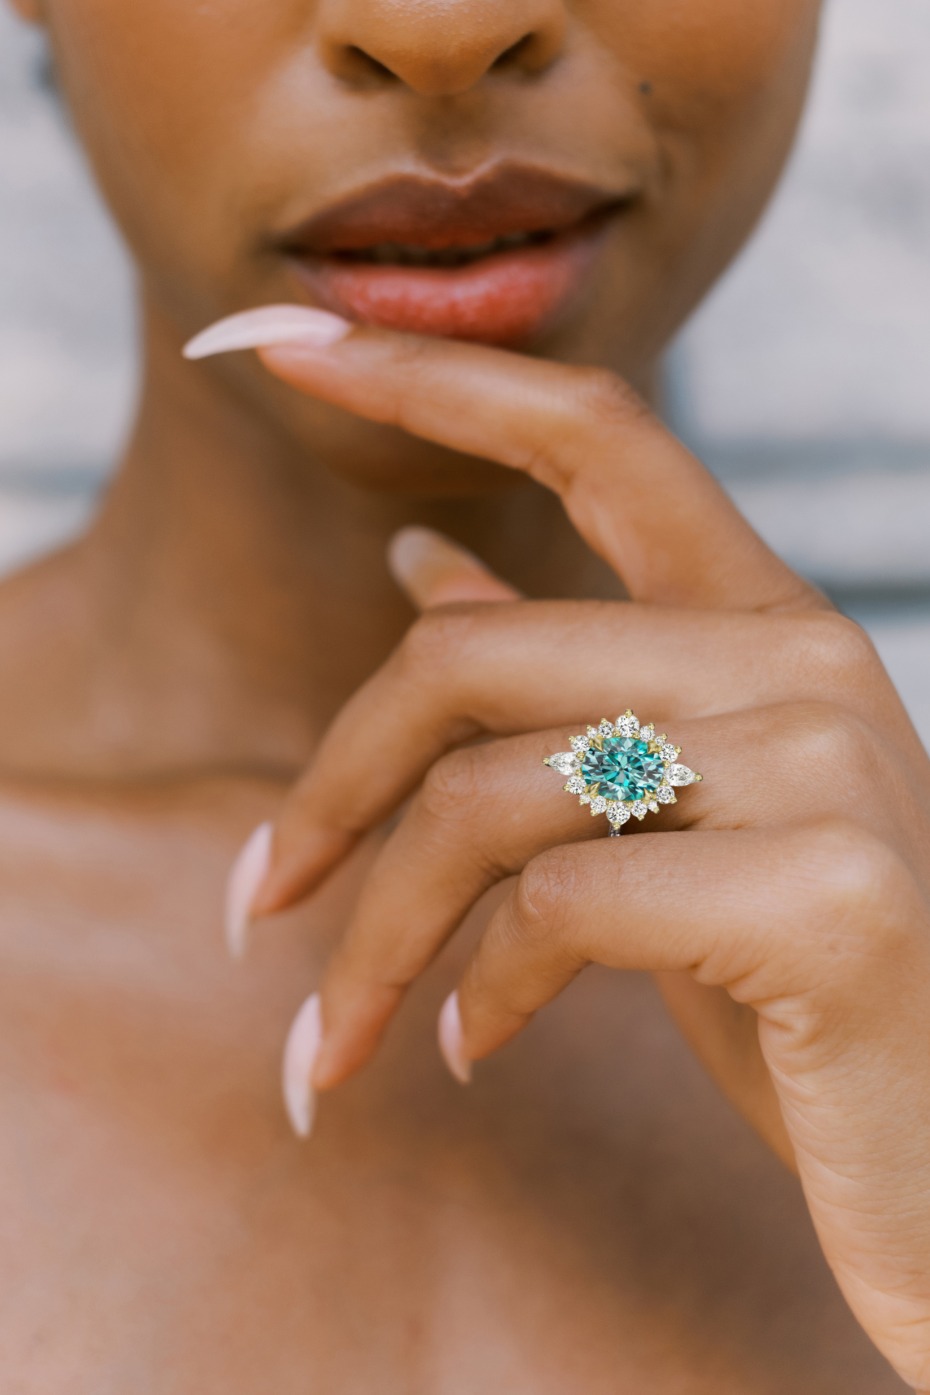 Ethically Made And Straight Up Stunning, We Can’t Help But Say Yes To These Engagement Rings By Kristin Coffin